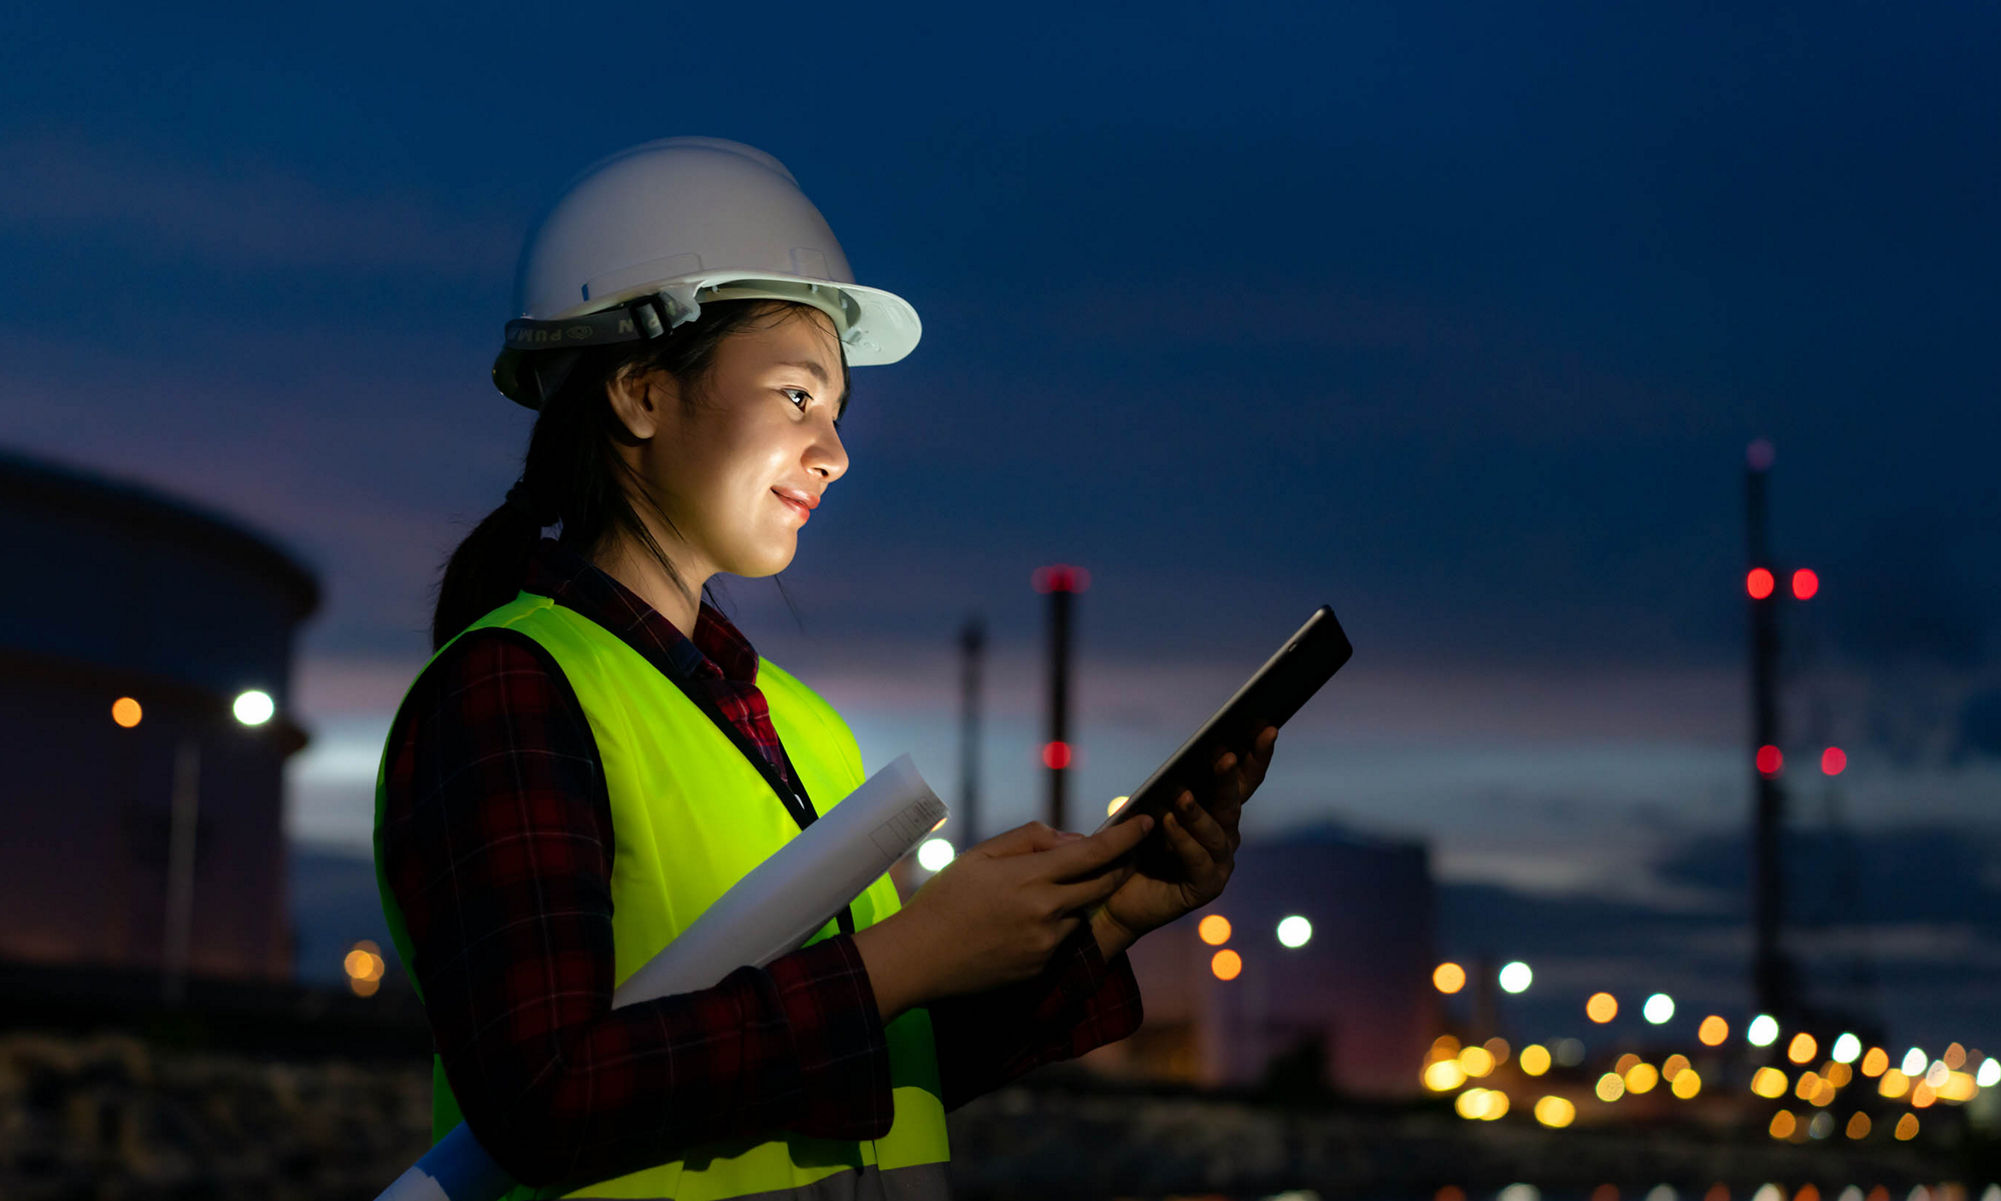 Women wearing helmet holding ipad in hand with city lights in the background